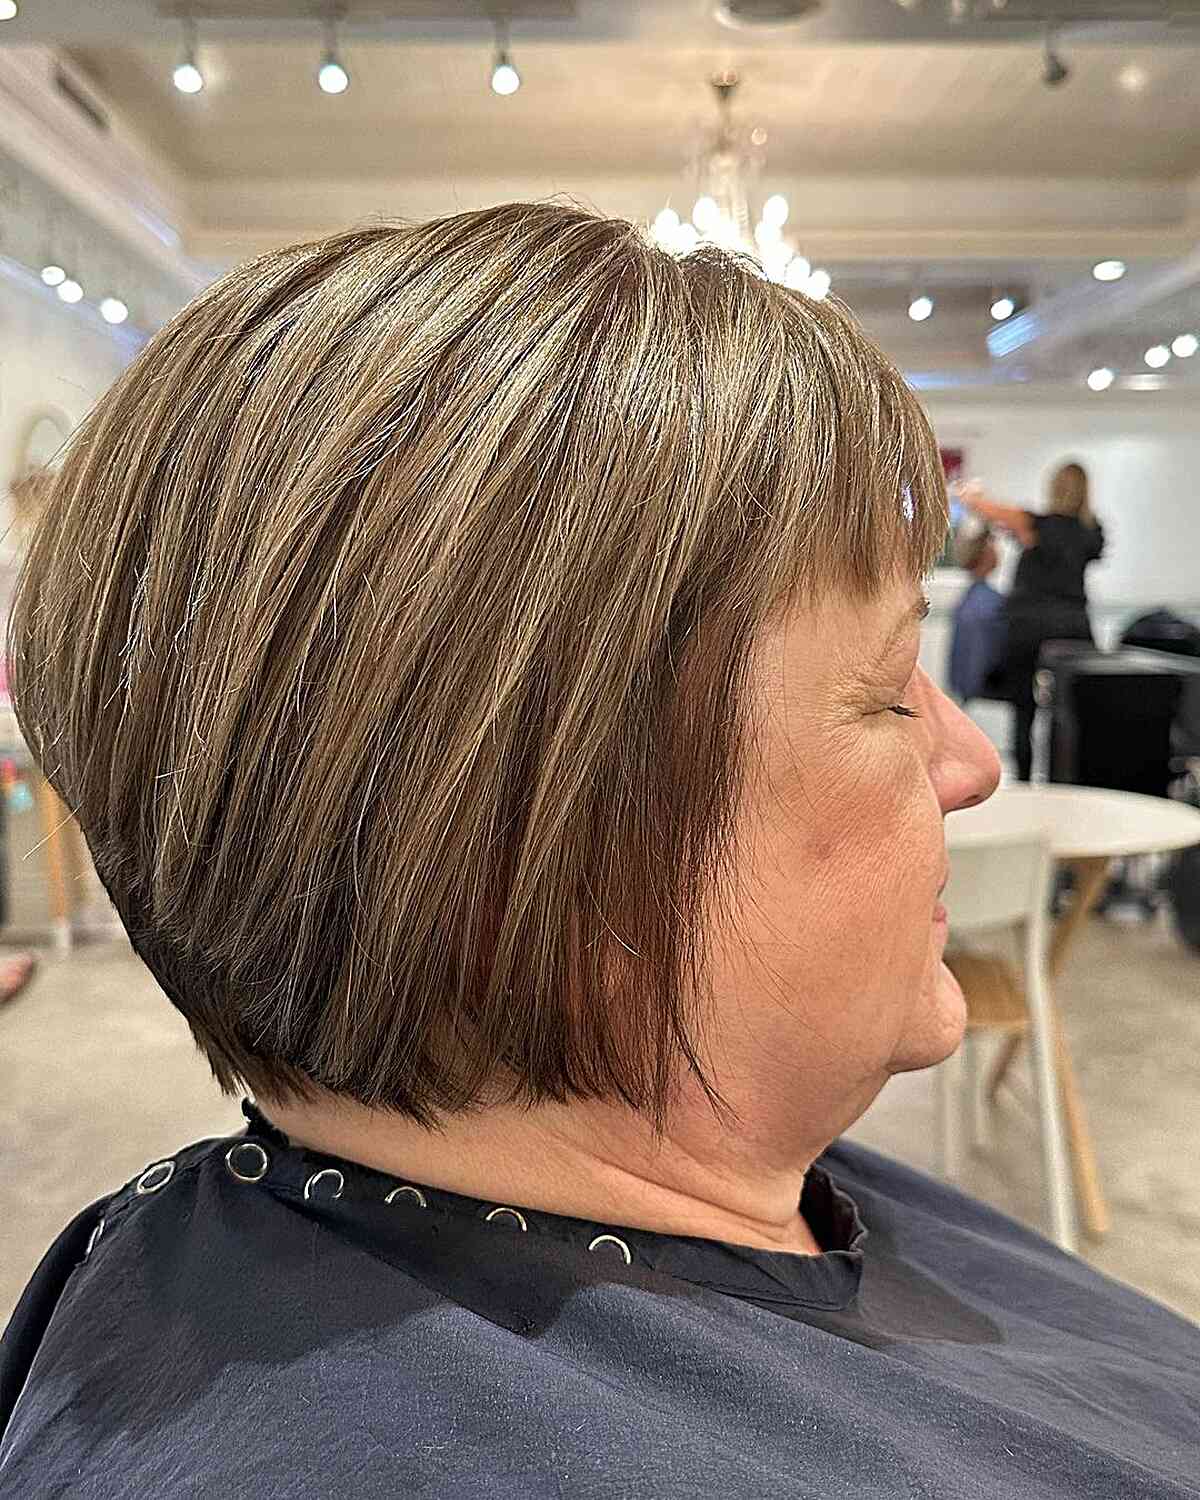 Short Wedge Thin Hair with Short Bangs for Older Women